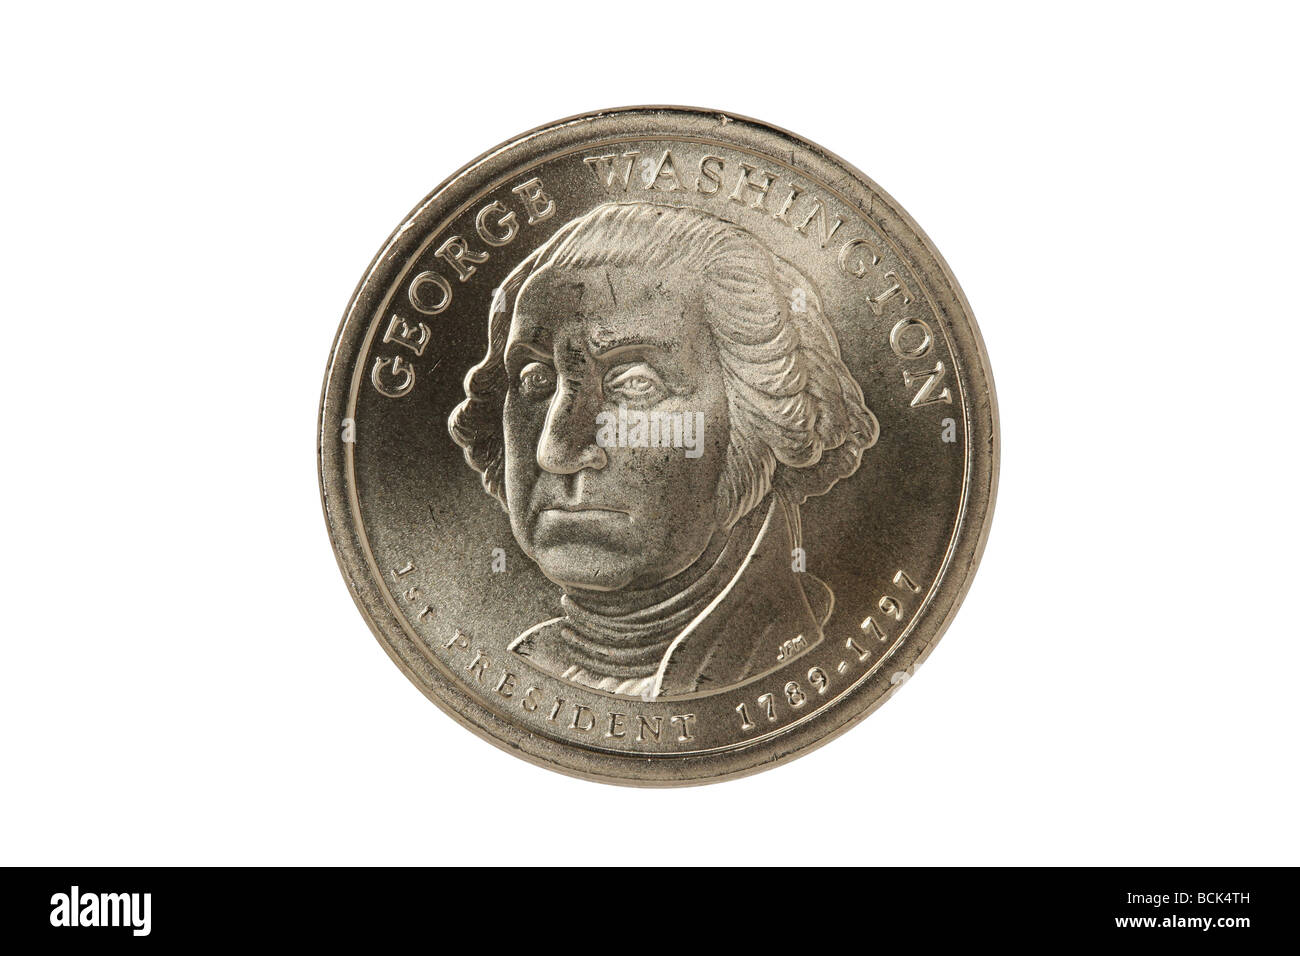 George Washington Dollar with clipping path Banque D'Images